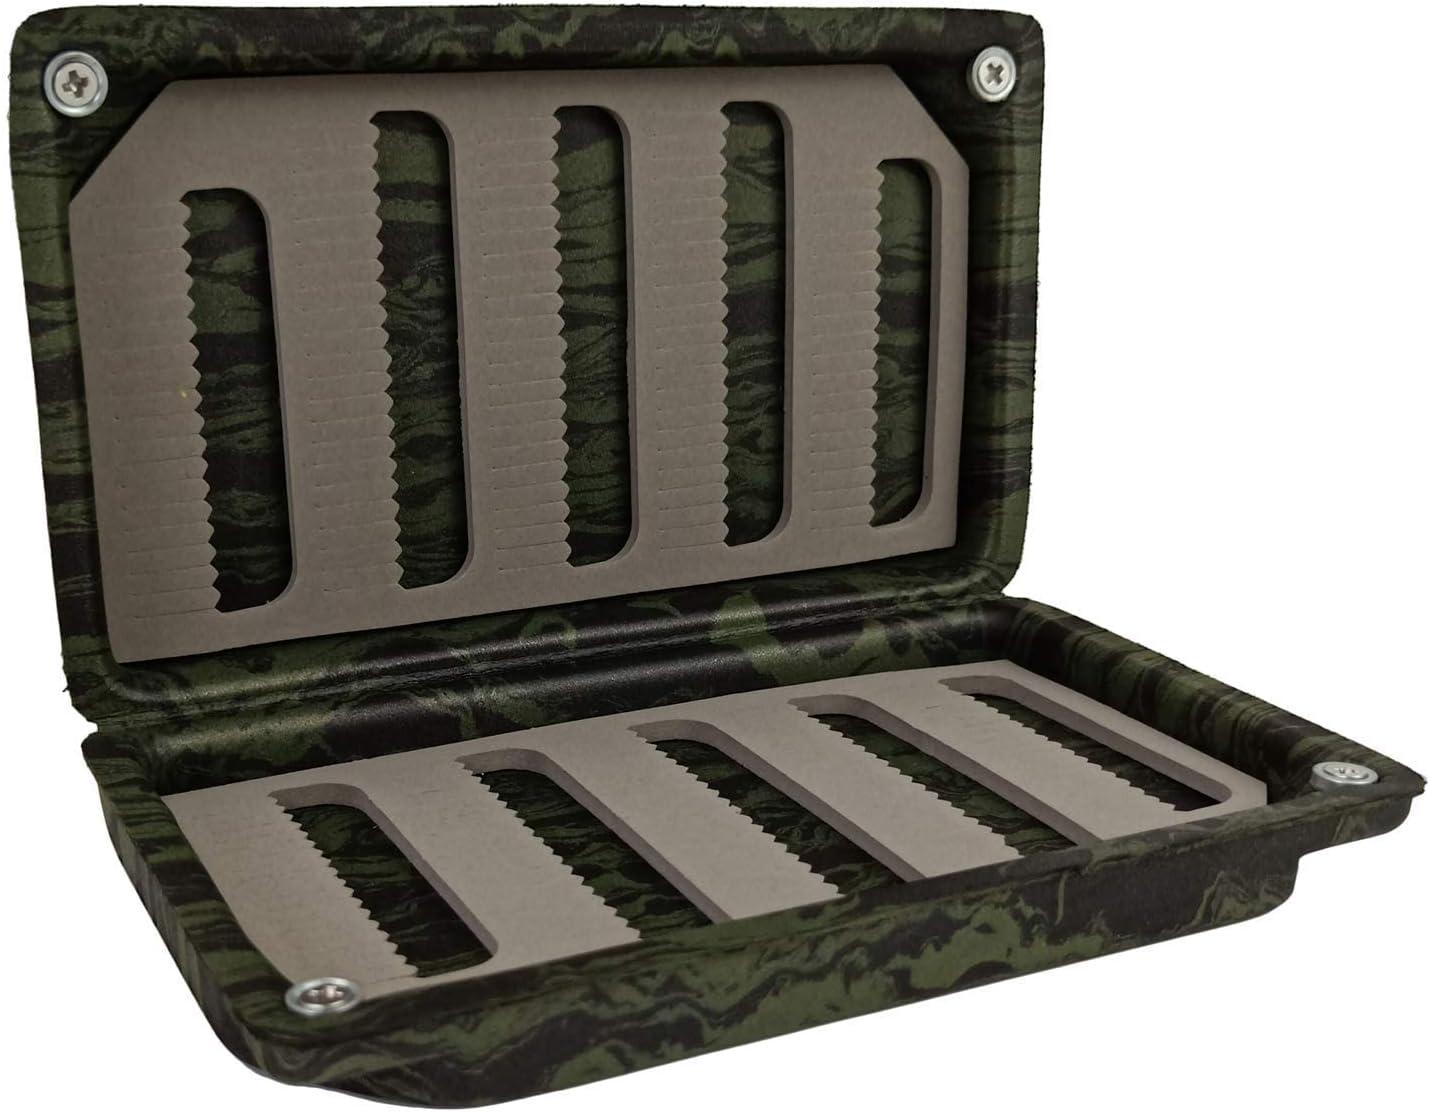 Aventik 2 PC Fly Box Float Tackle Box Slit EVAFoam Fly Fishing Tackle Boxes  Fishing Storage 6X3.48X1.2inch Camo green+Camo black -2pc pack